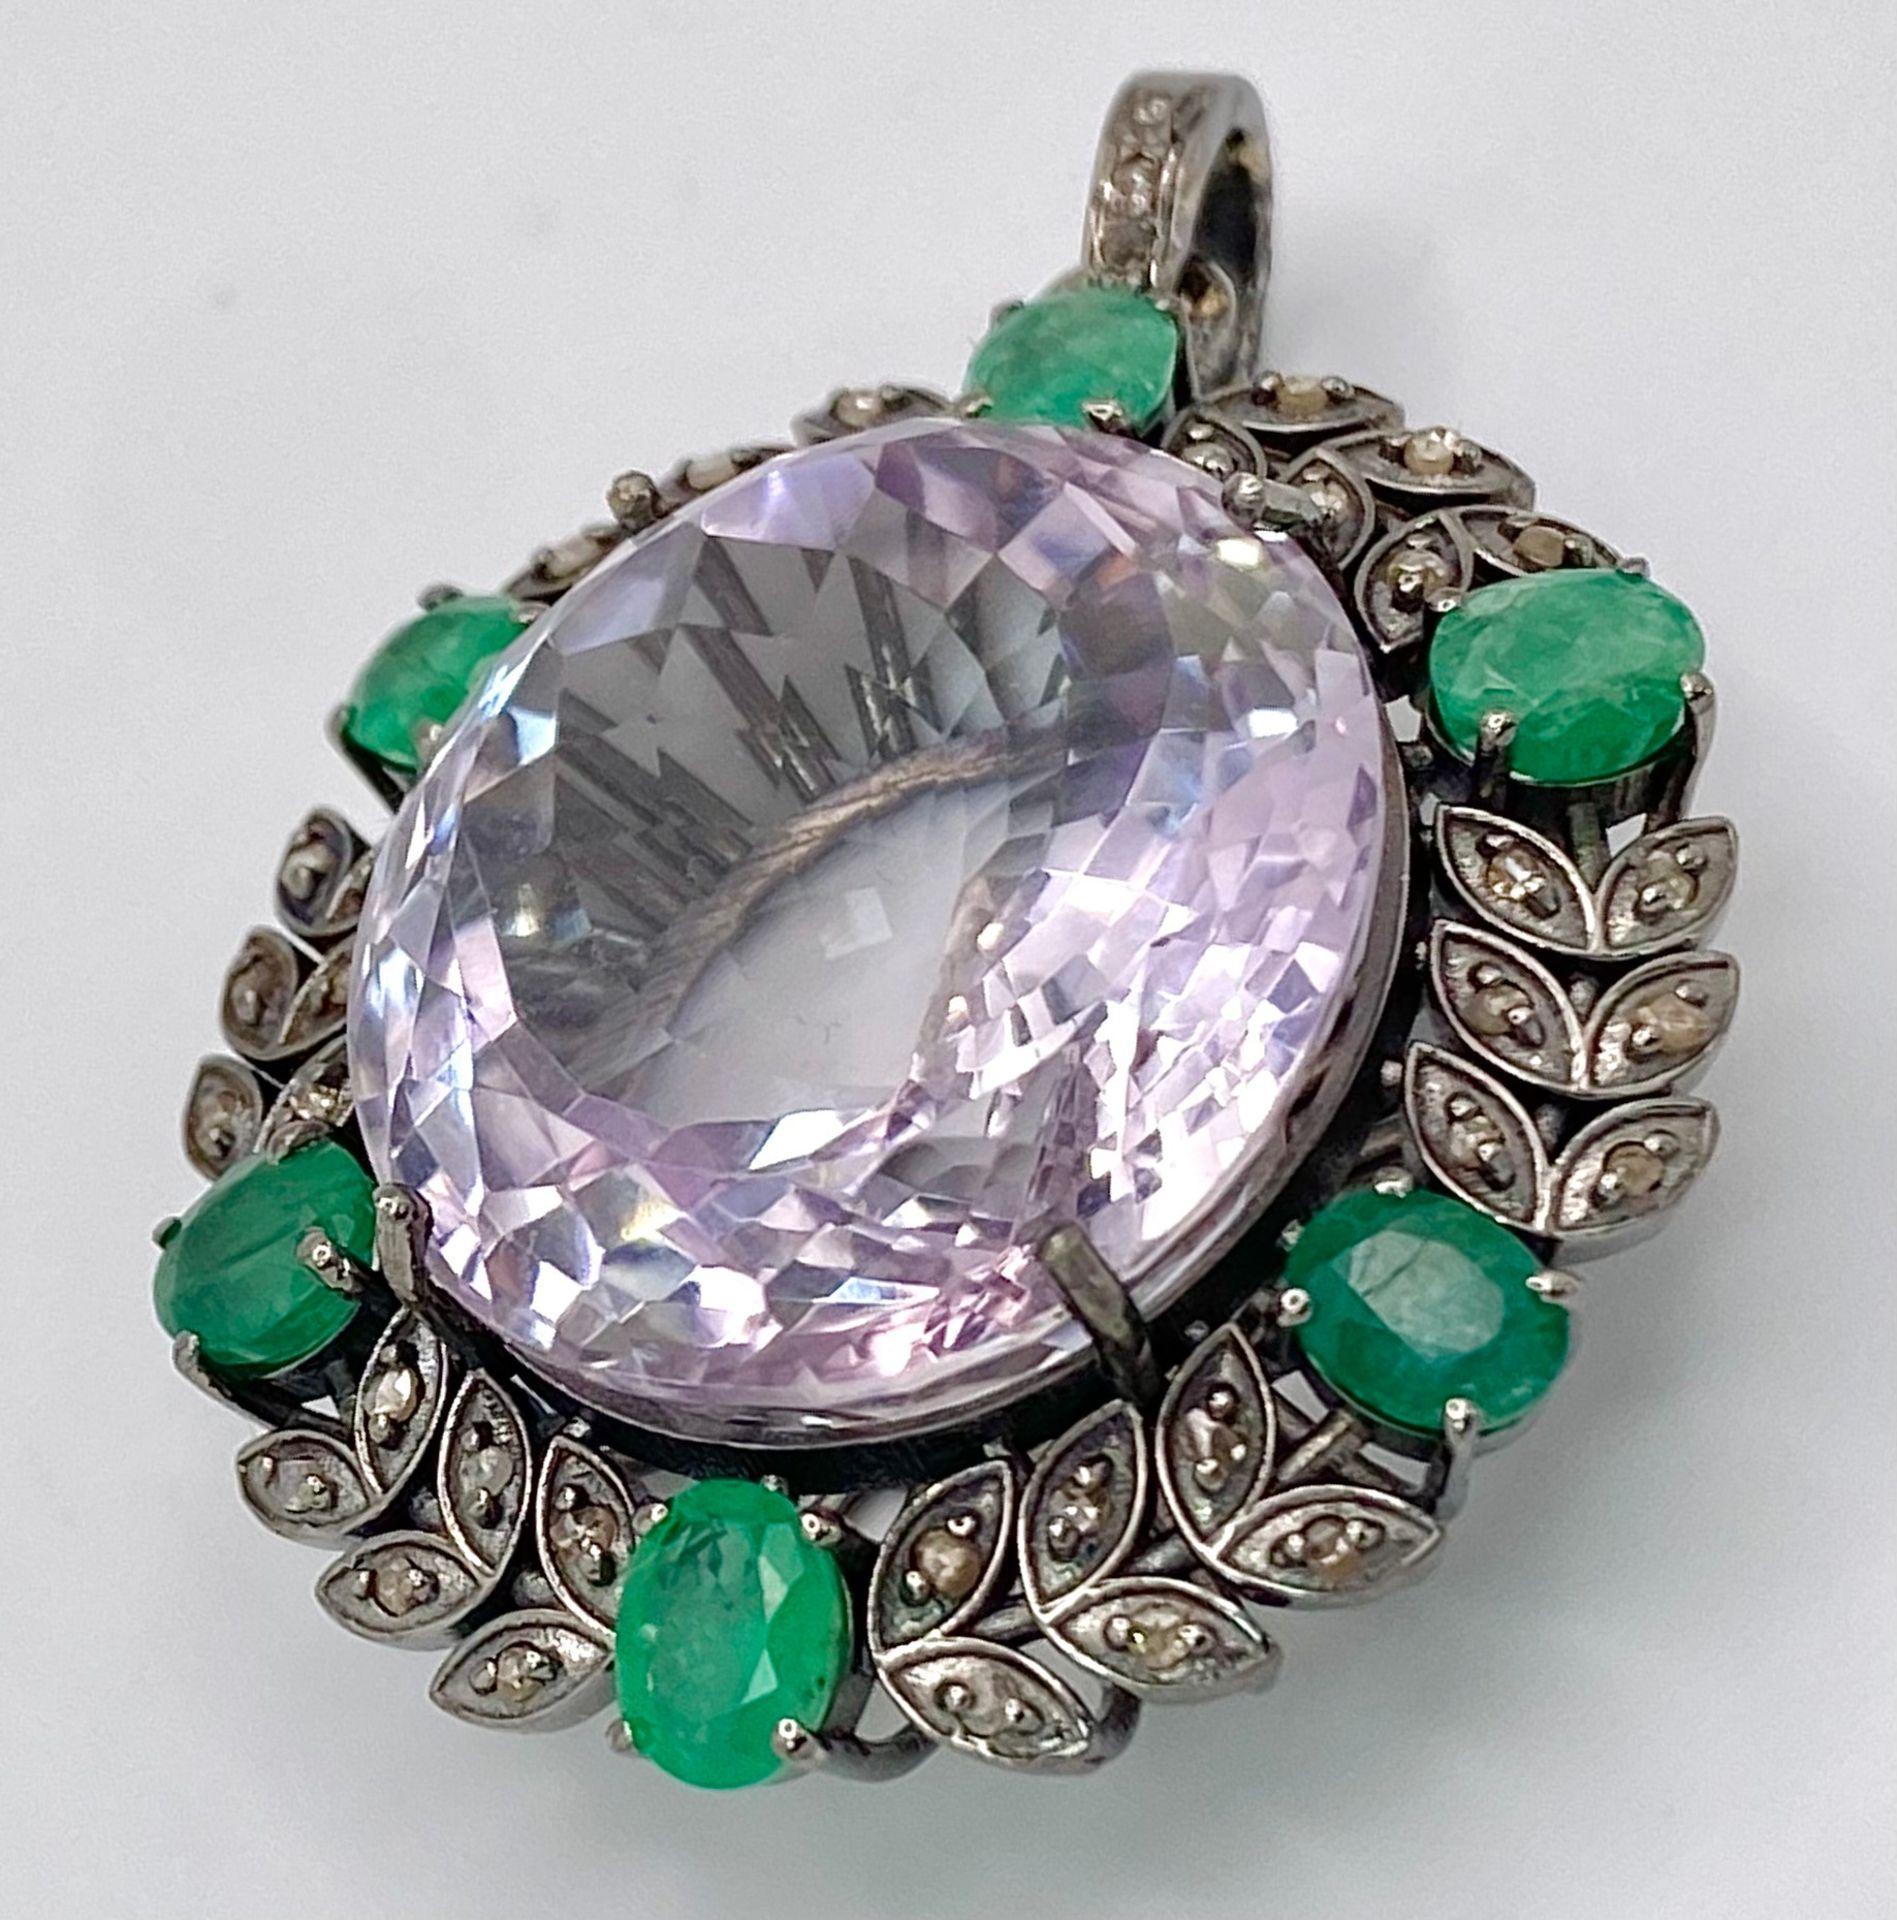 A 30.4ct Amethyst, Emeralds and Diamond Pendant set in 925 Silver. A beautiful clean amethyst with a